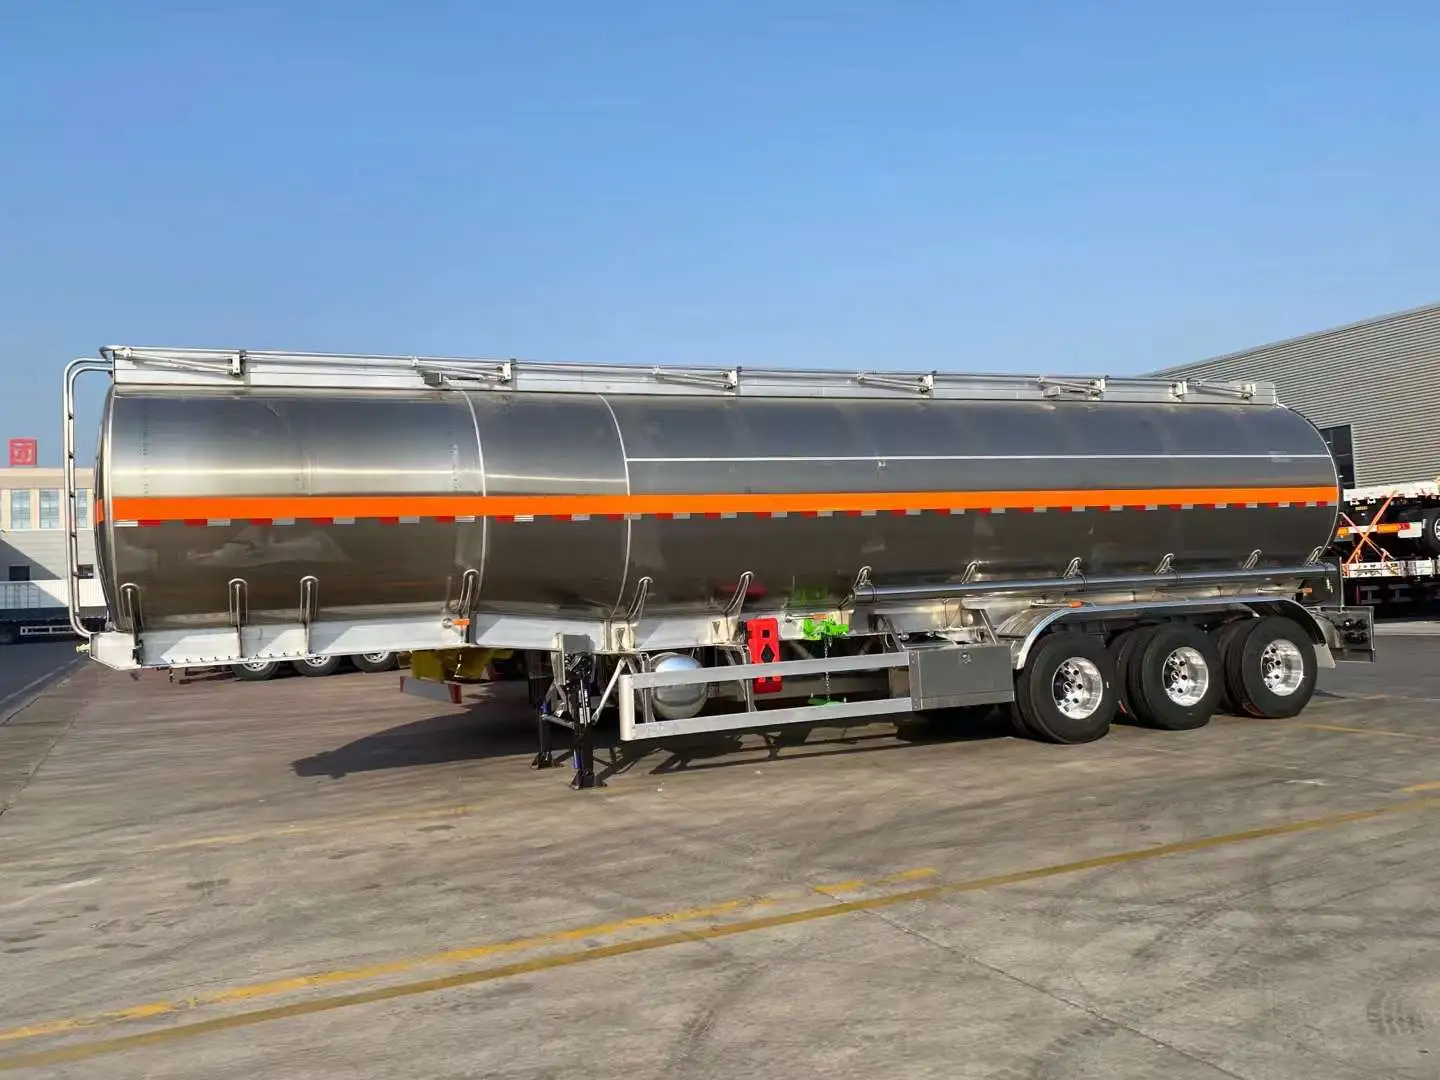 45cbm 3 axles aluminum tanker semi trailers are ready for delivery to the middle-east country